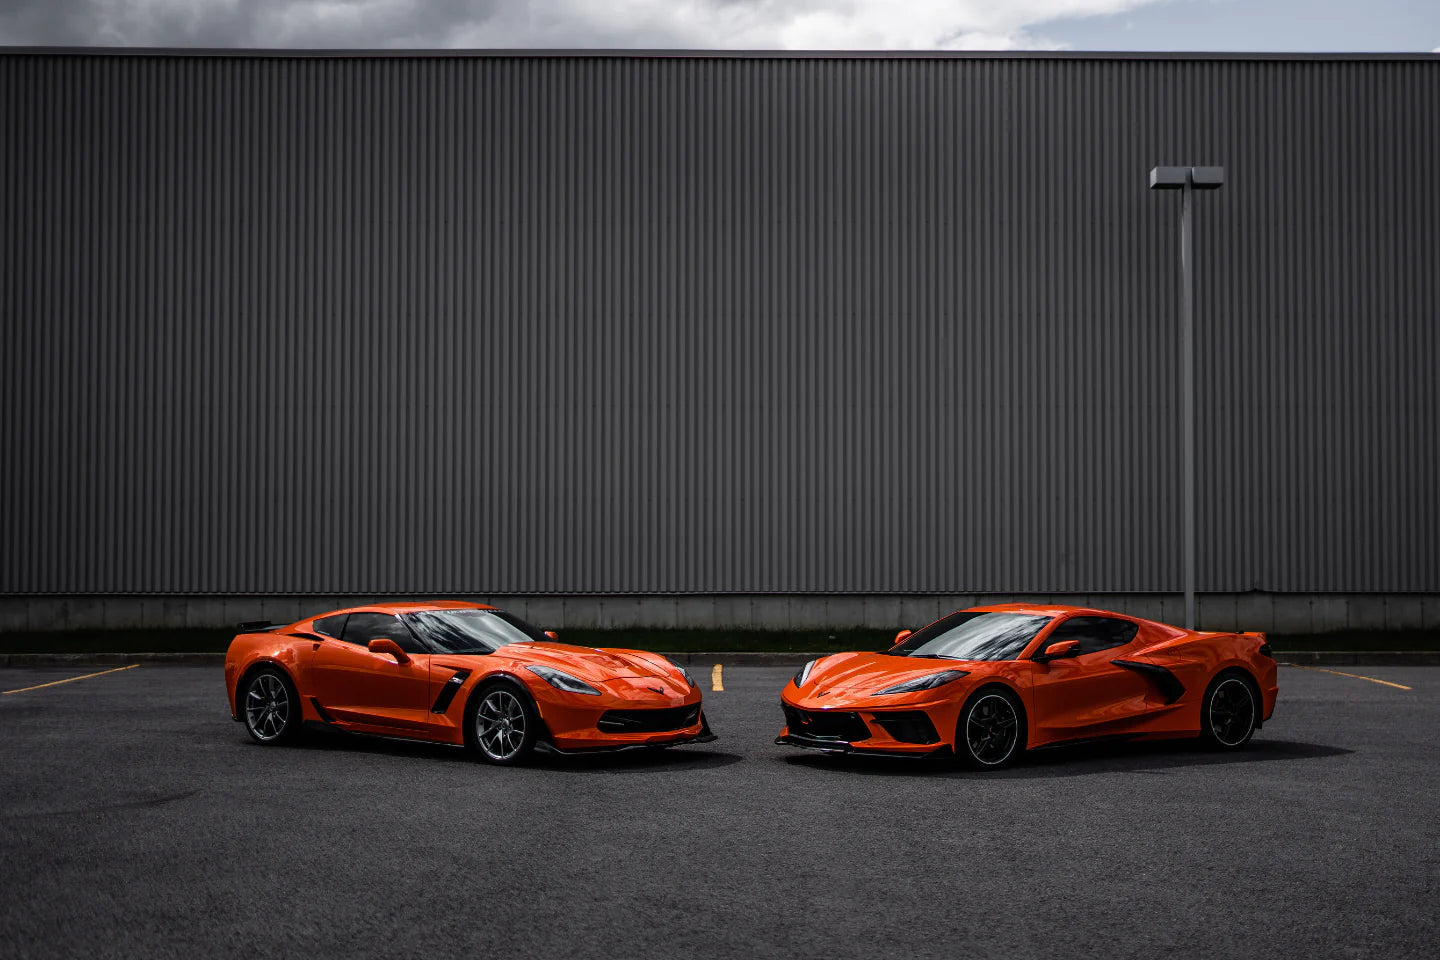 Two orange Corvettes facing each other